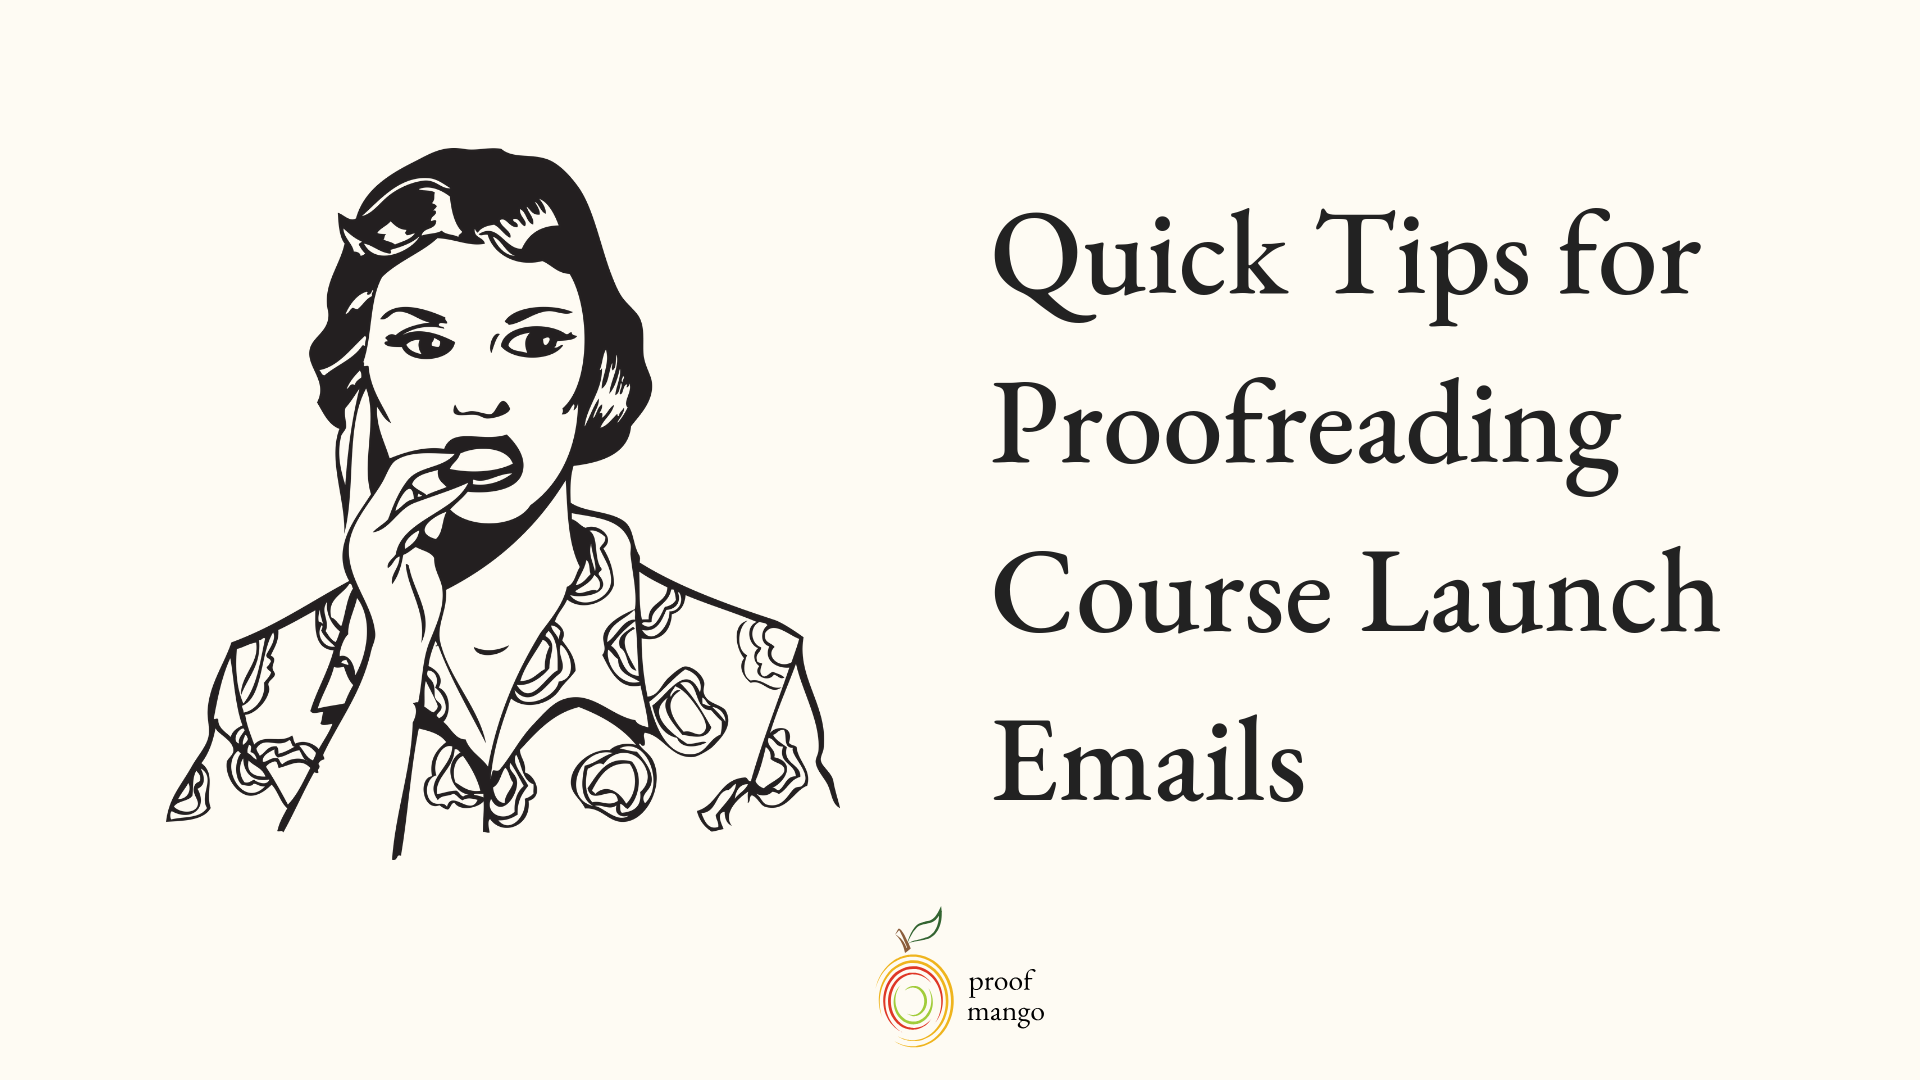 Quick-Tips-for-Proofreading-Course-Launch-Emails